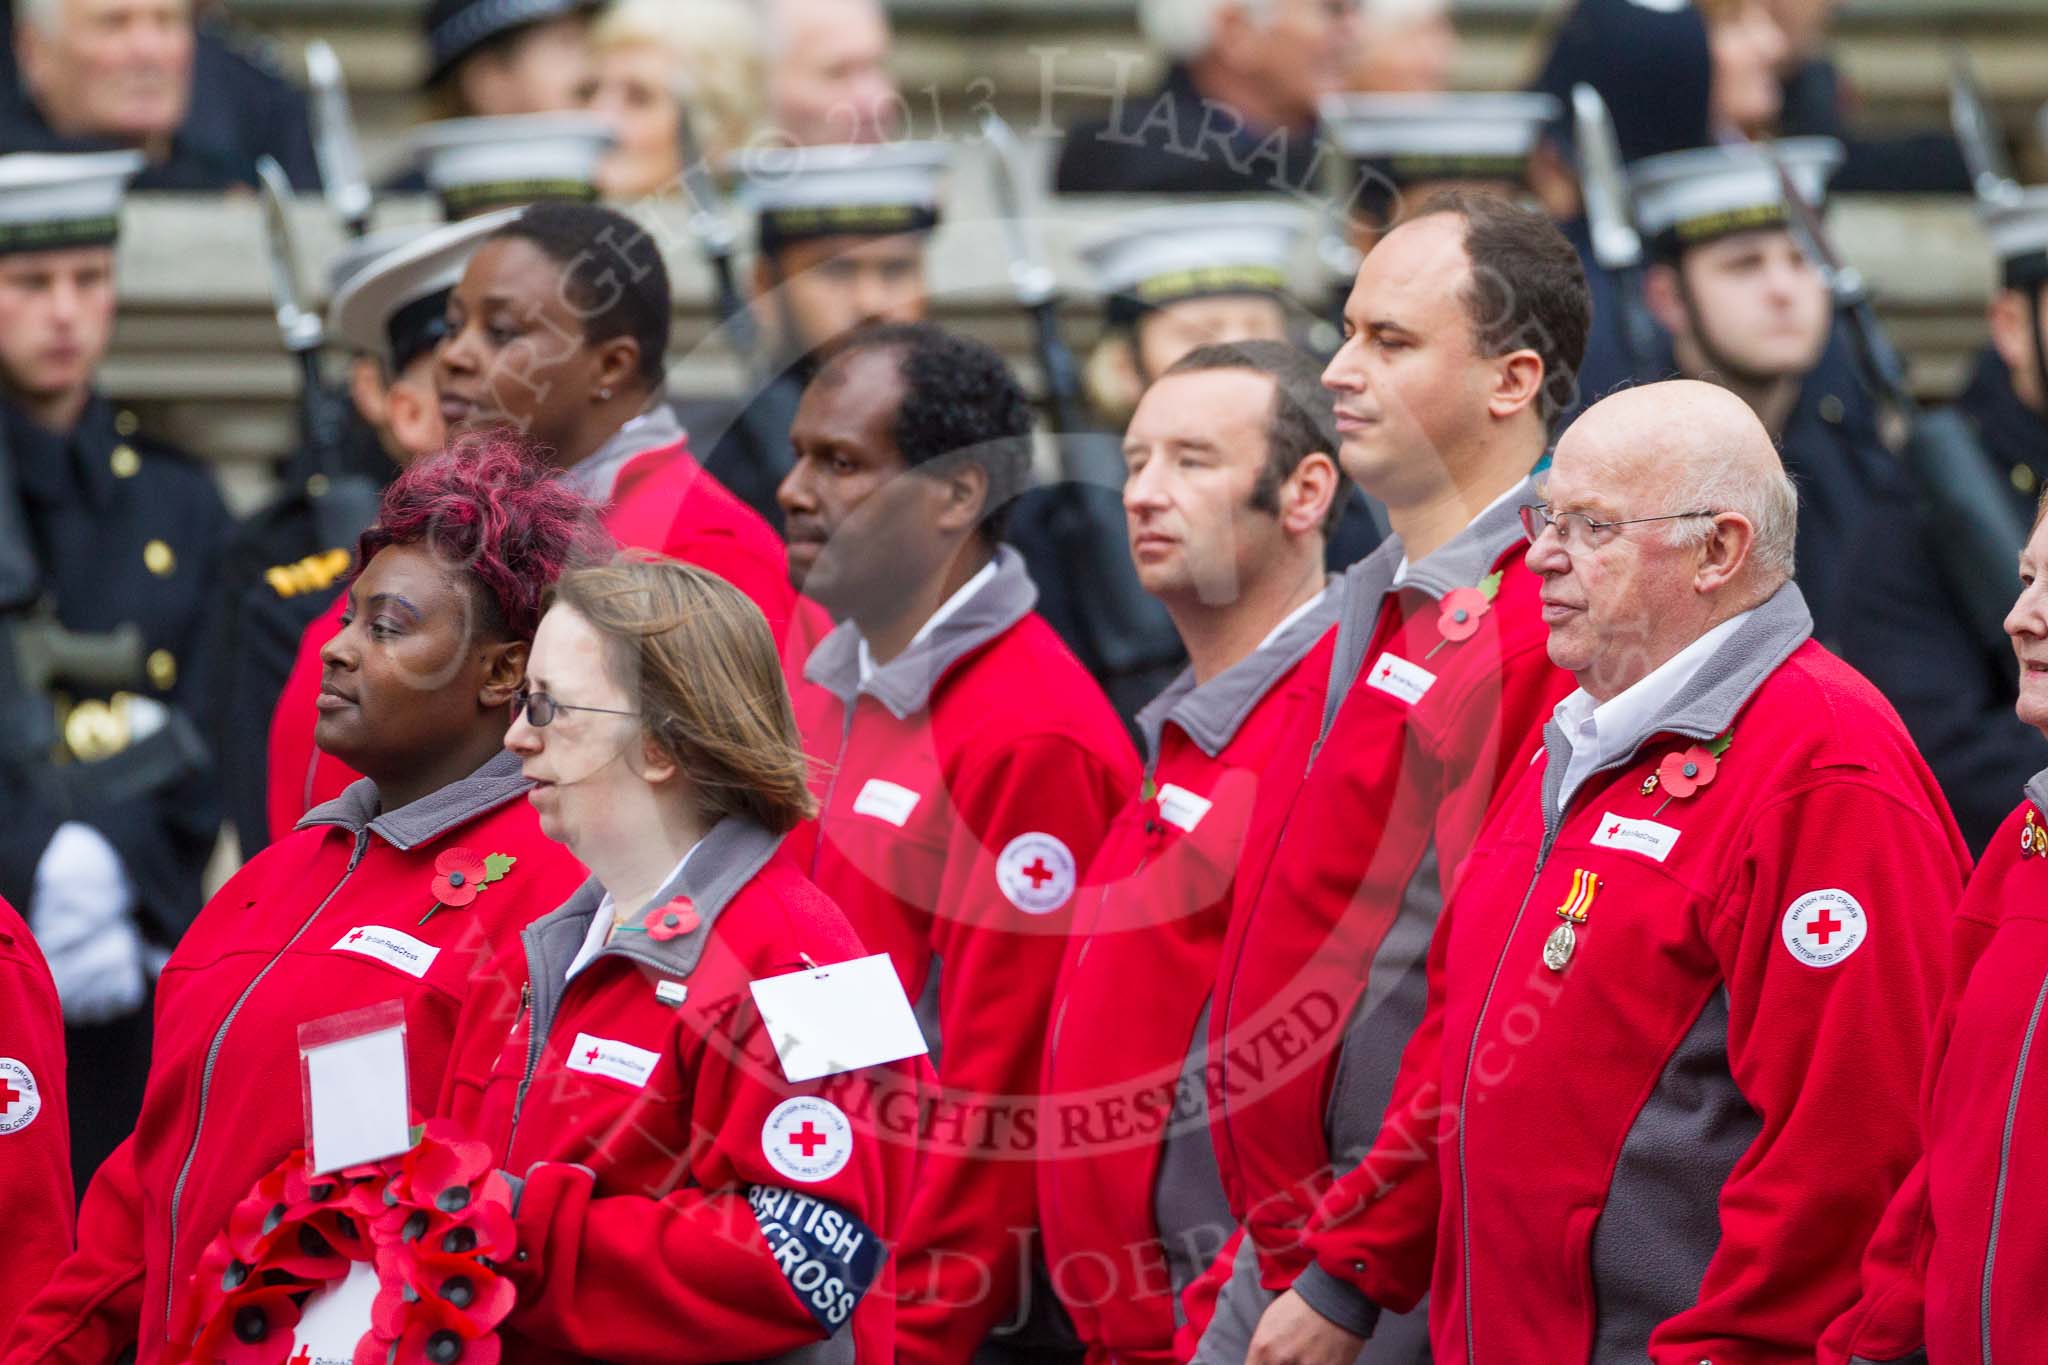 Remembrance Sunday at the Cenotaph 2015: Group M16, British Red Cross.
Cenotaph, Whitehall, London SW1,
London,
Greater London,
United Kingdom,
on 08 November 2015 at 12:16, image #1514